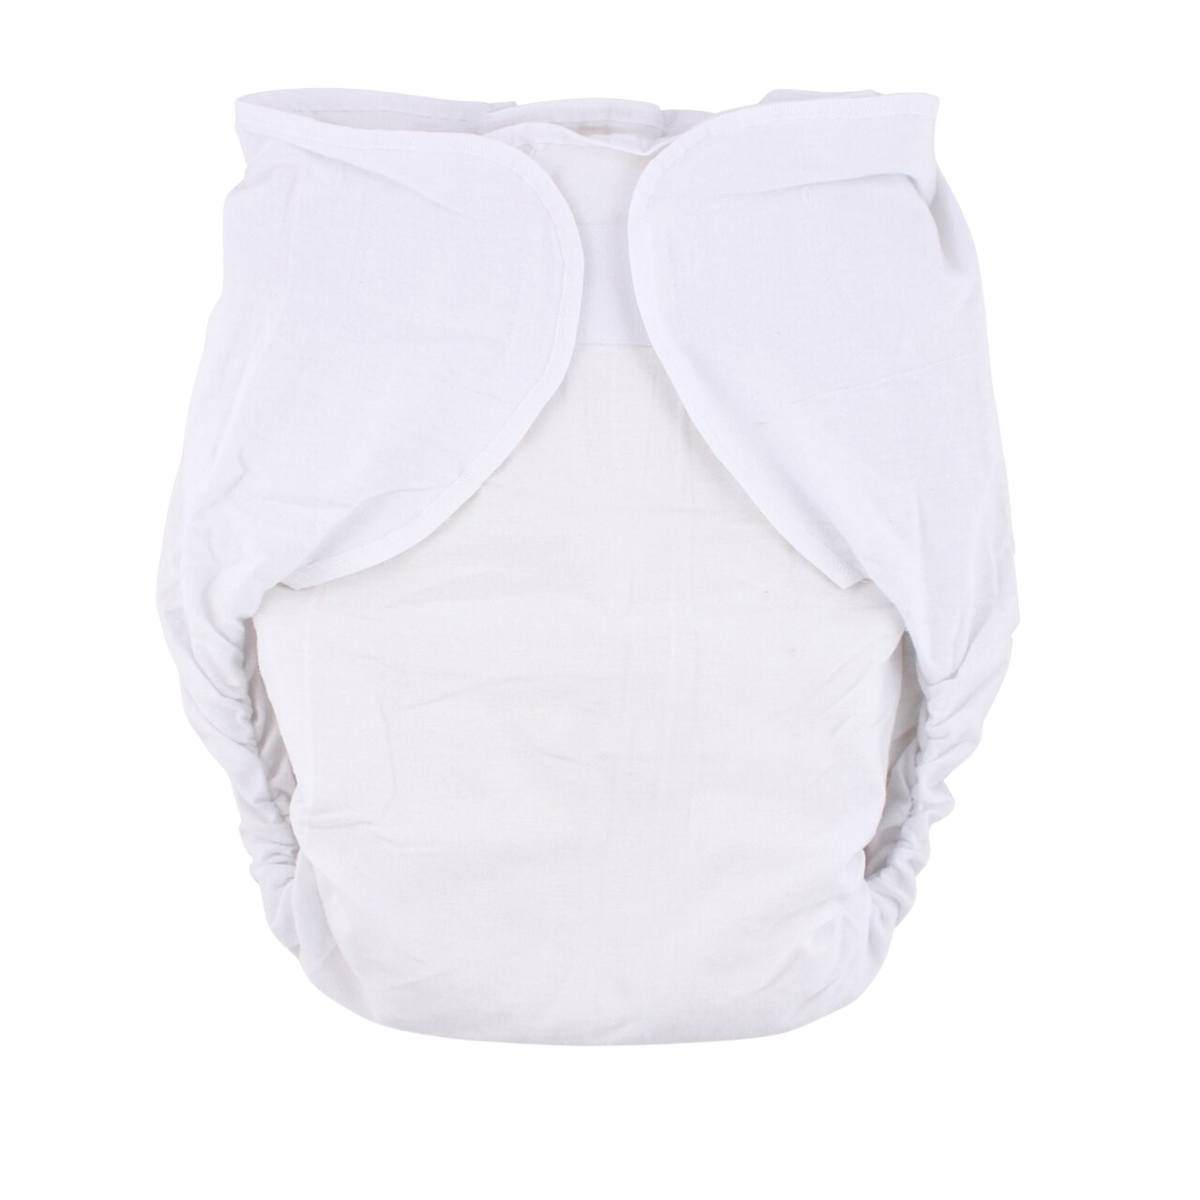 Adult Diaper Clothing